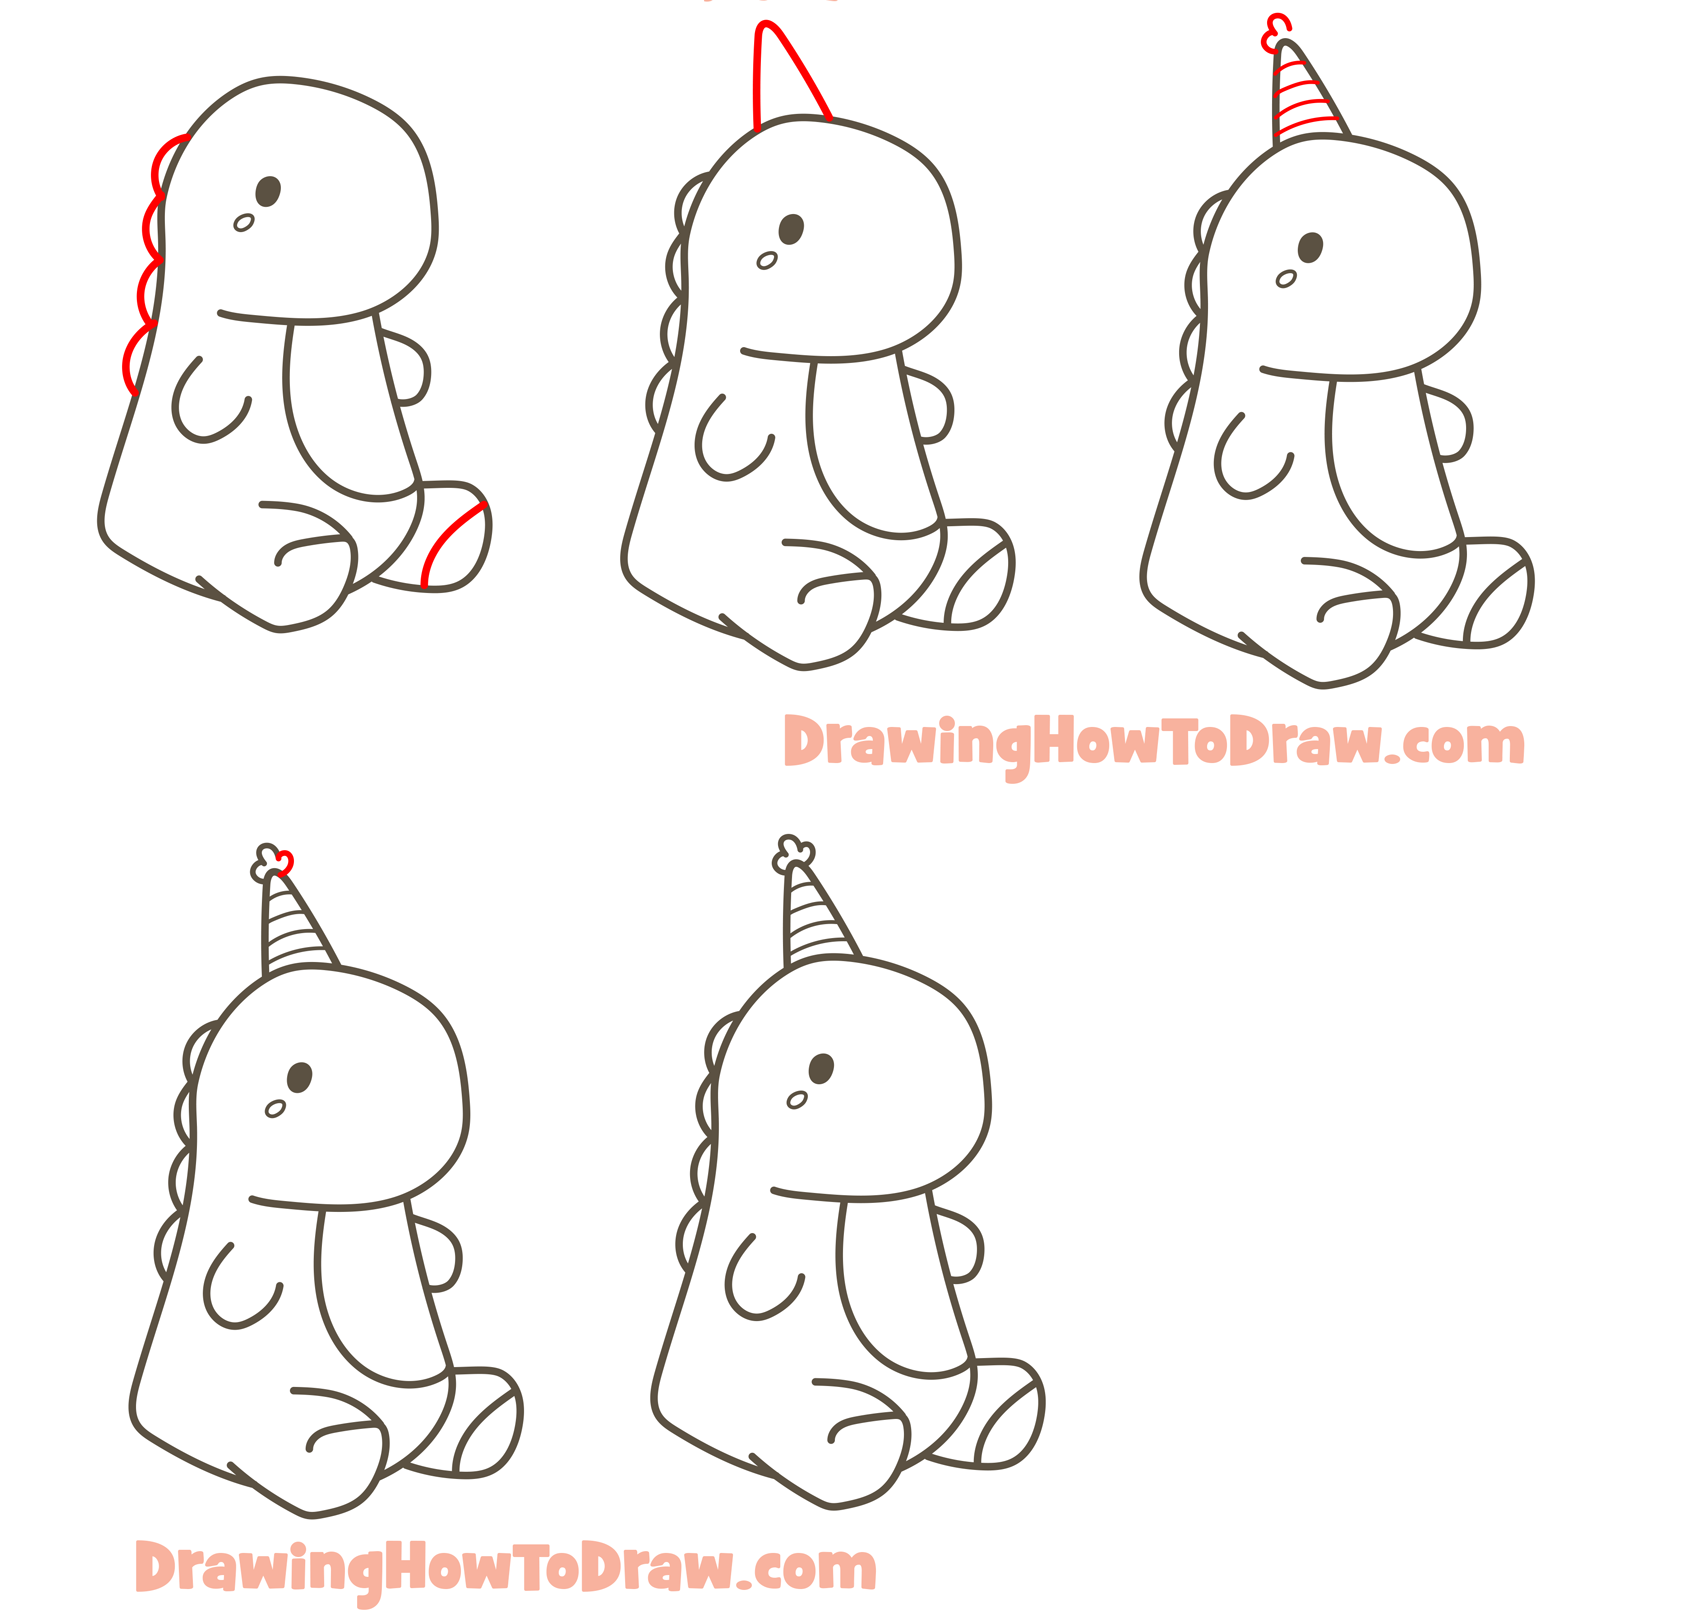 How to Draw a Cute Kawaii Dinosaur with a Birthday Hat on (VHYHCY Stuffed Animal Drawing) Easy Step by Step Drawing Tutorial